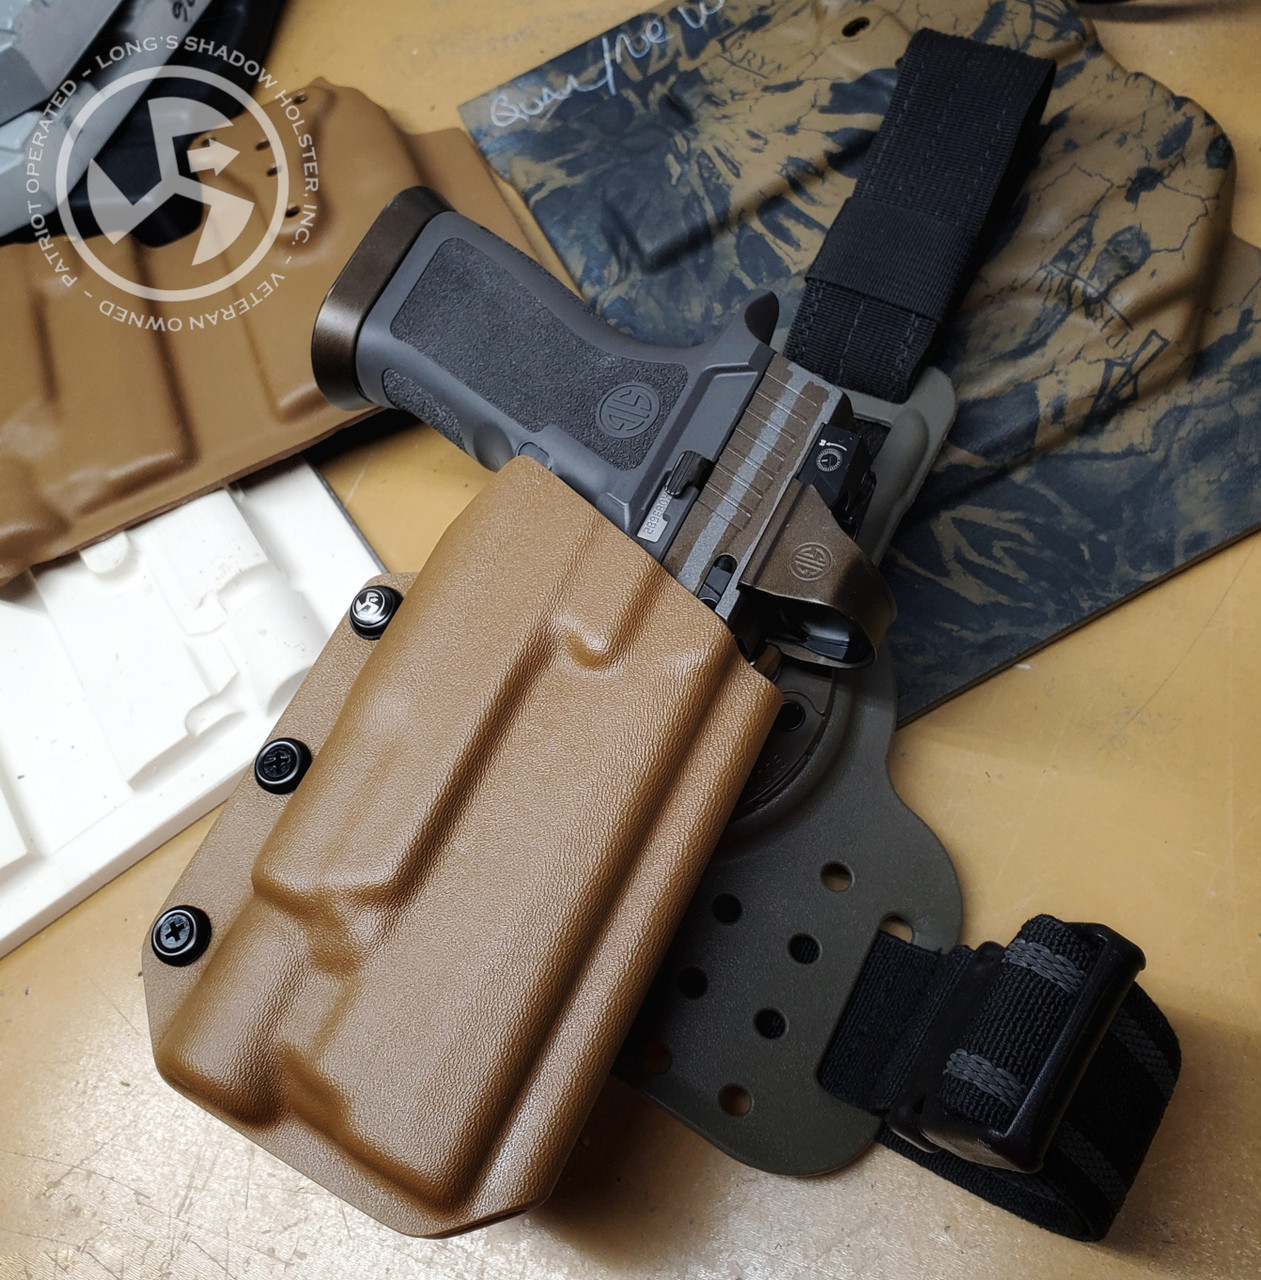 The Huron Holster - Long's Shadow Holster, Inc.